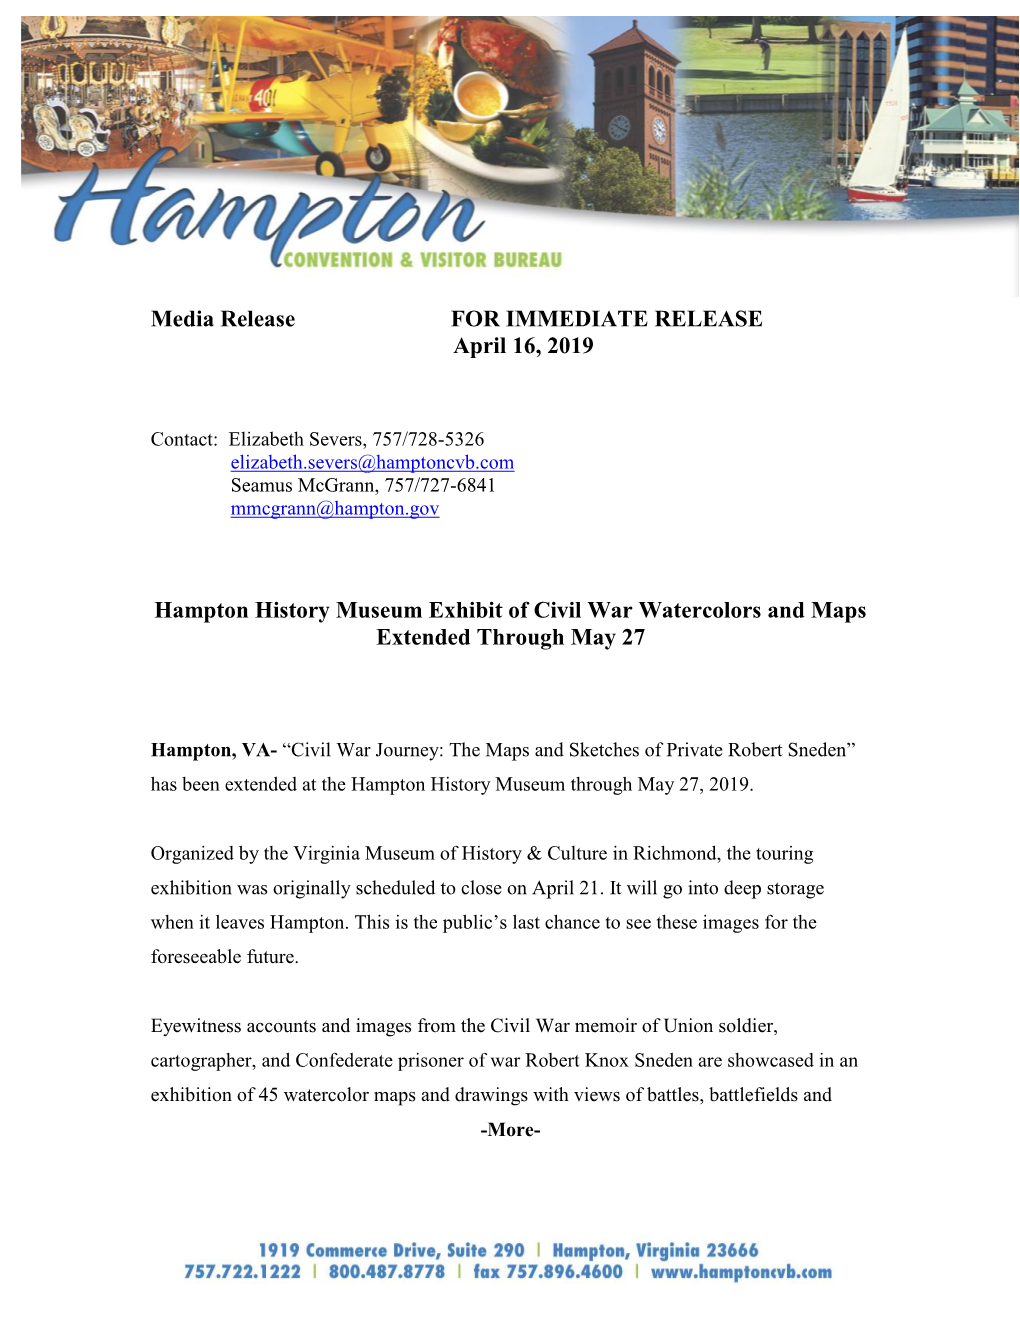 Hampton History Museum Exhibit of Civil War Watercolors and Maps Extended Through May 27